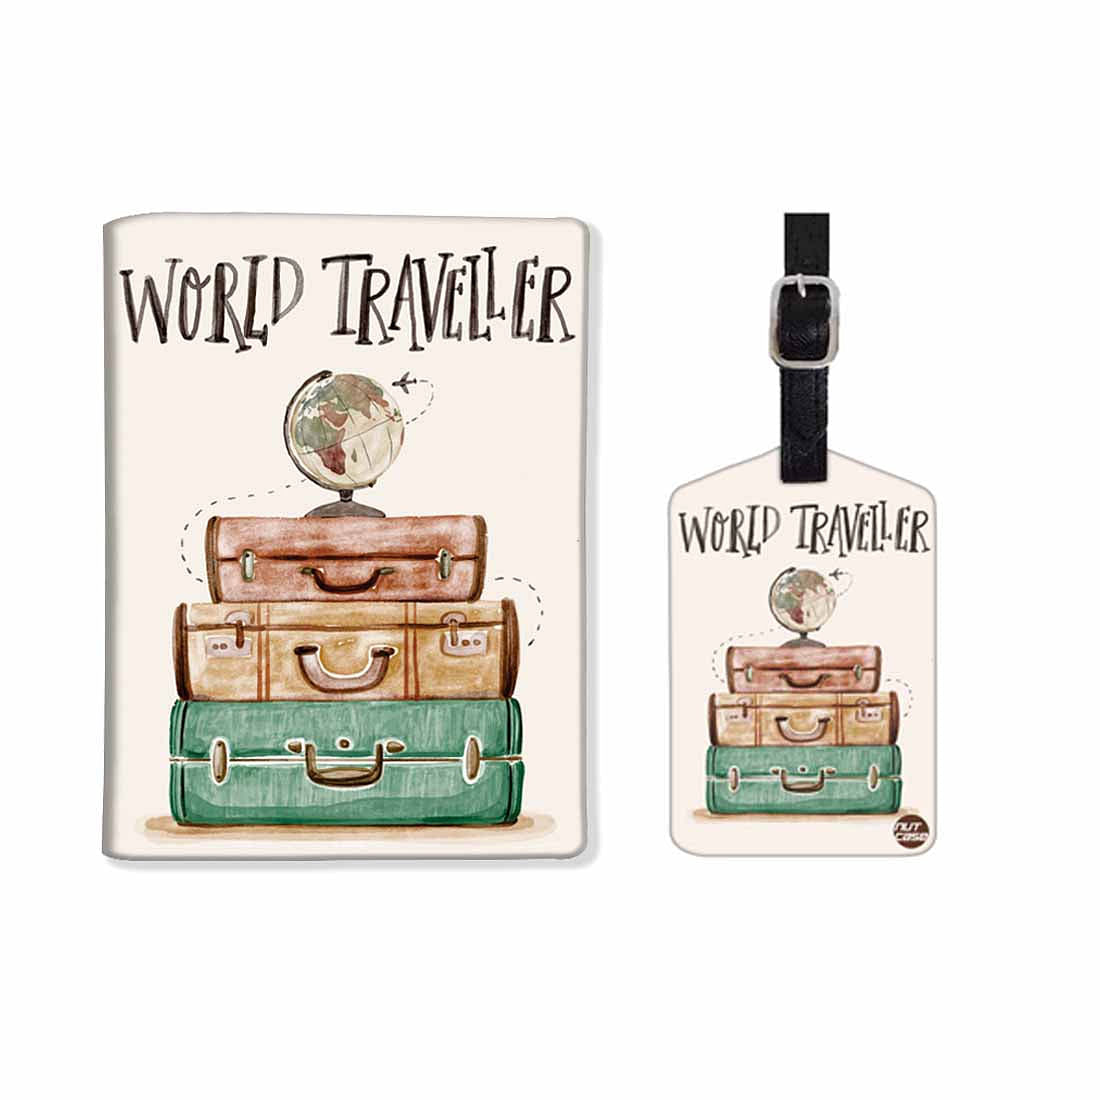 Passport Cover Holder Travel Case With Luggage Tag - World Traveller Nutcase